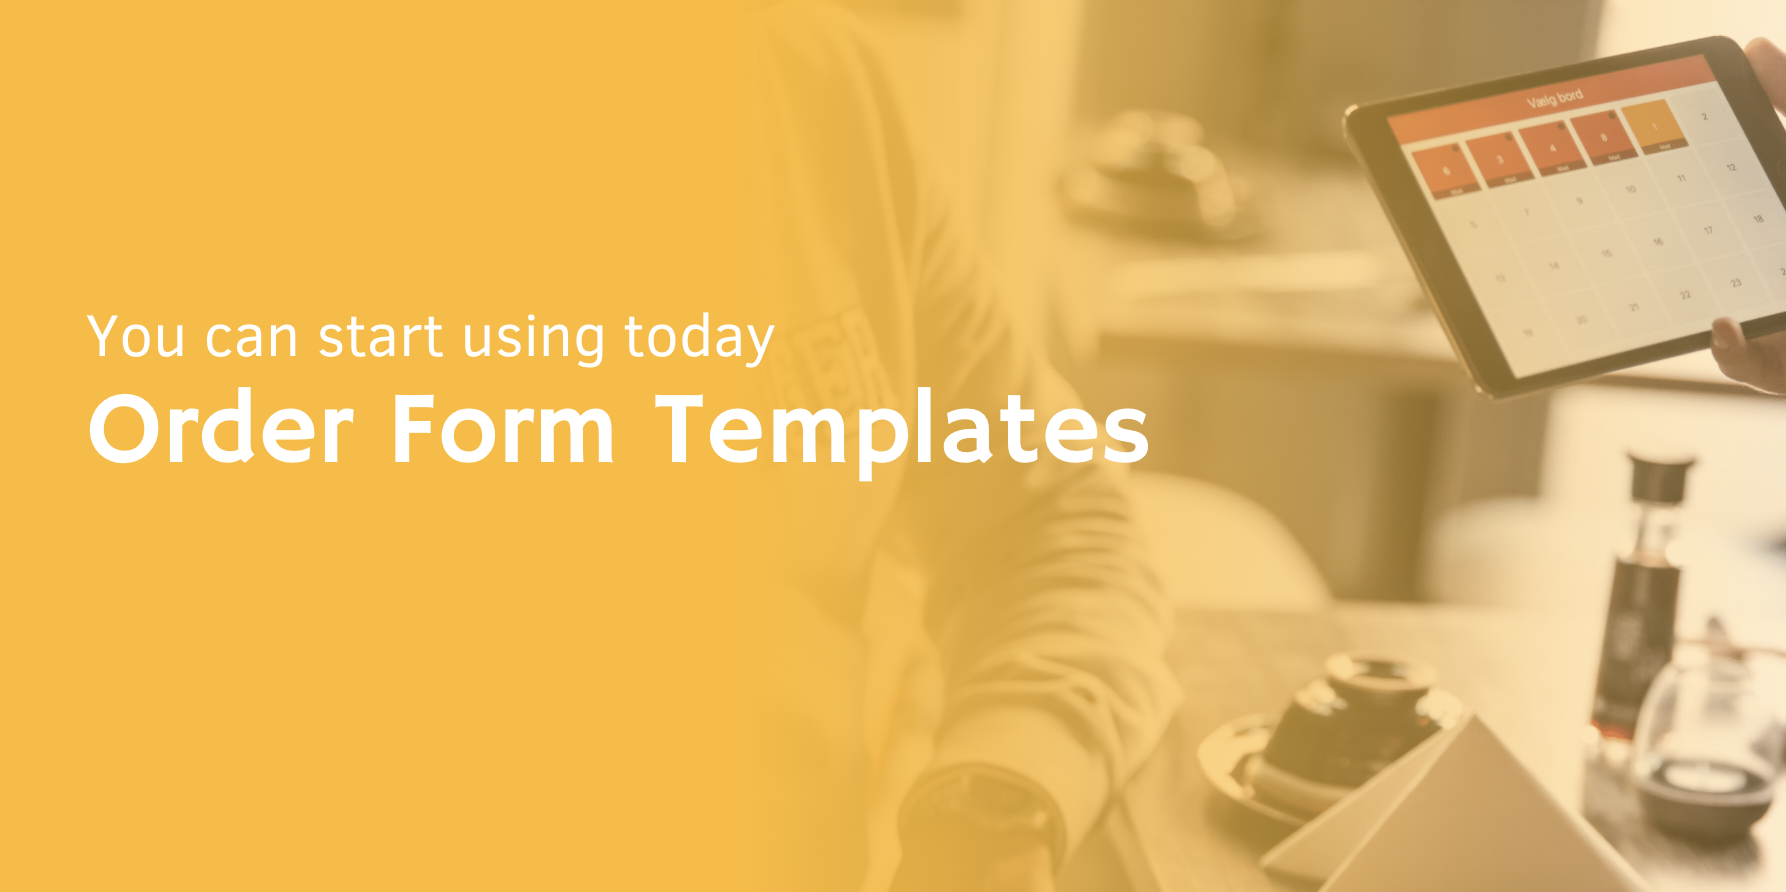 Free Order Form Templates You Can Start Using Today